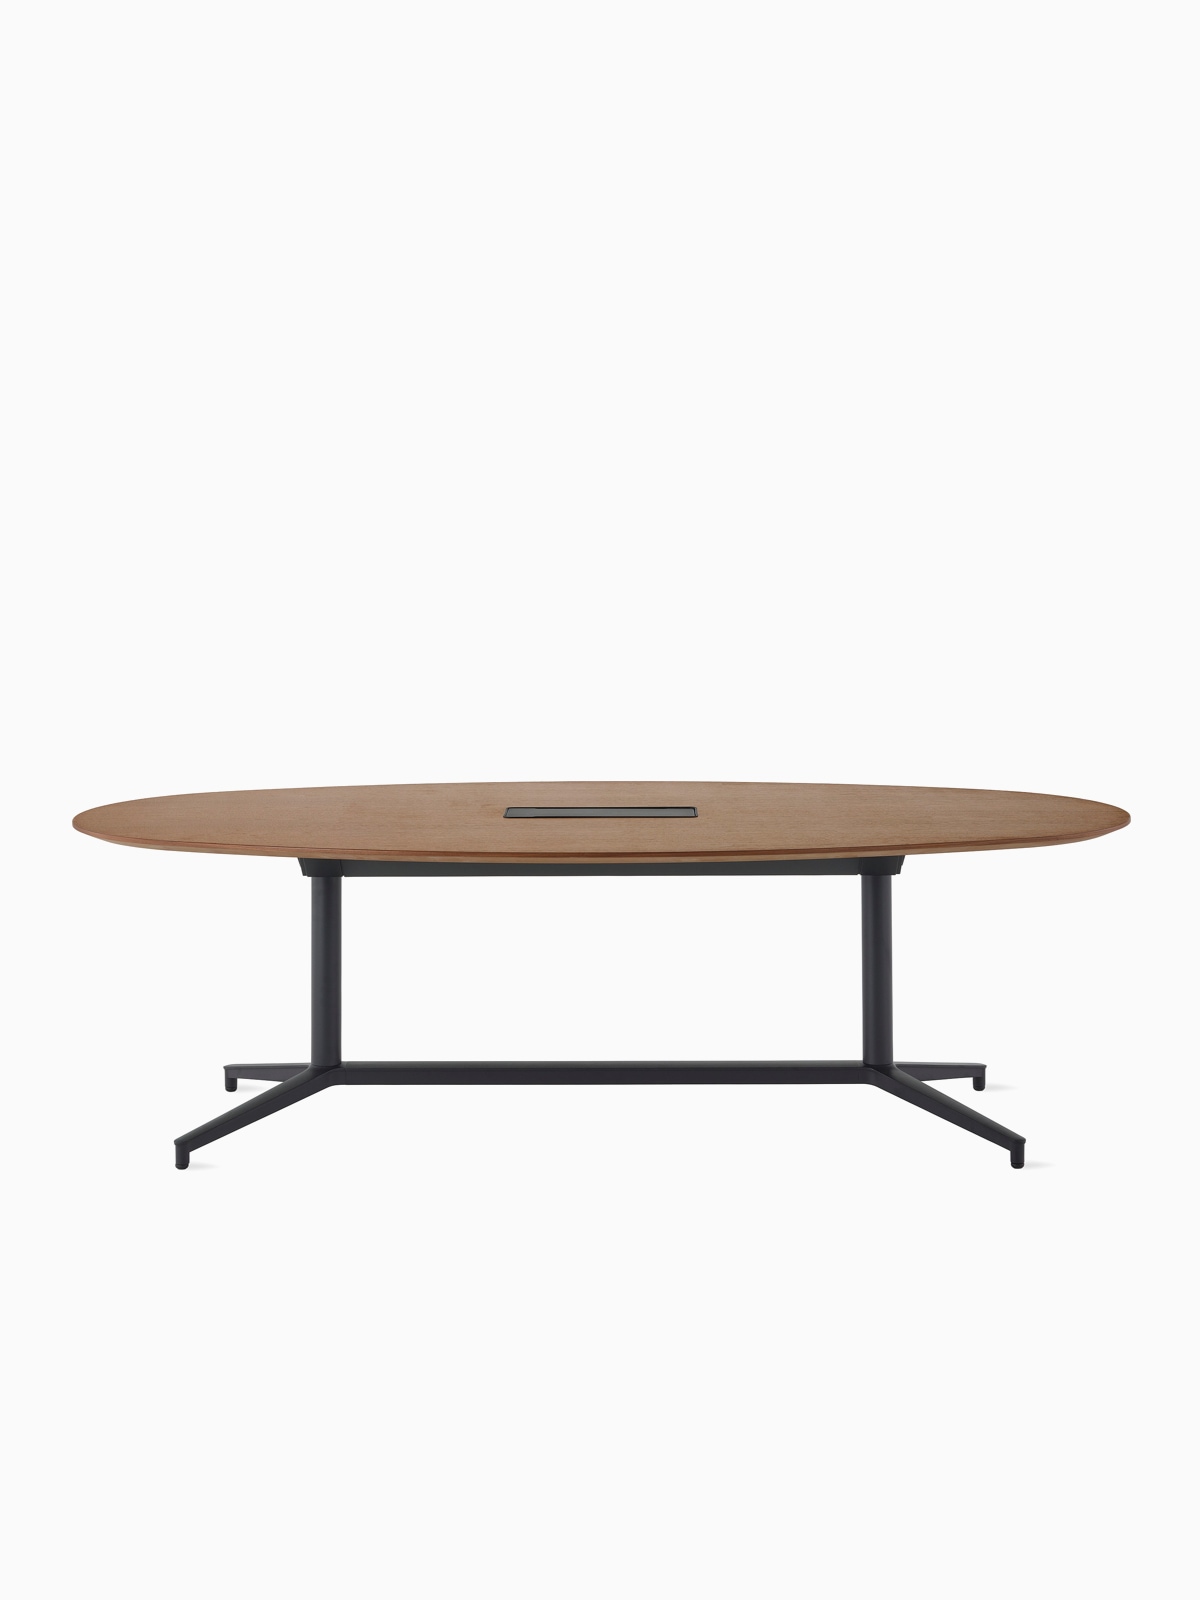 A Headway conference table with a black Y base.